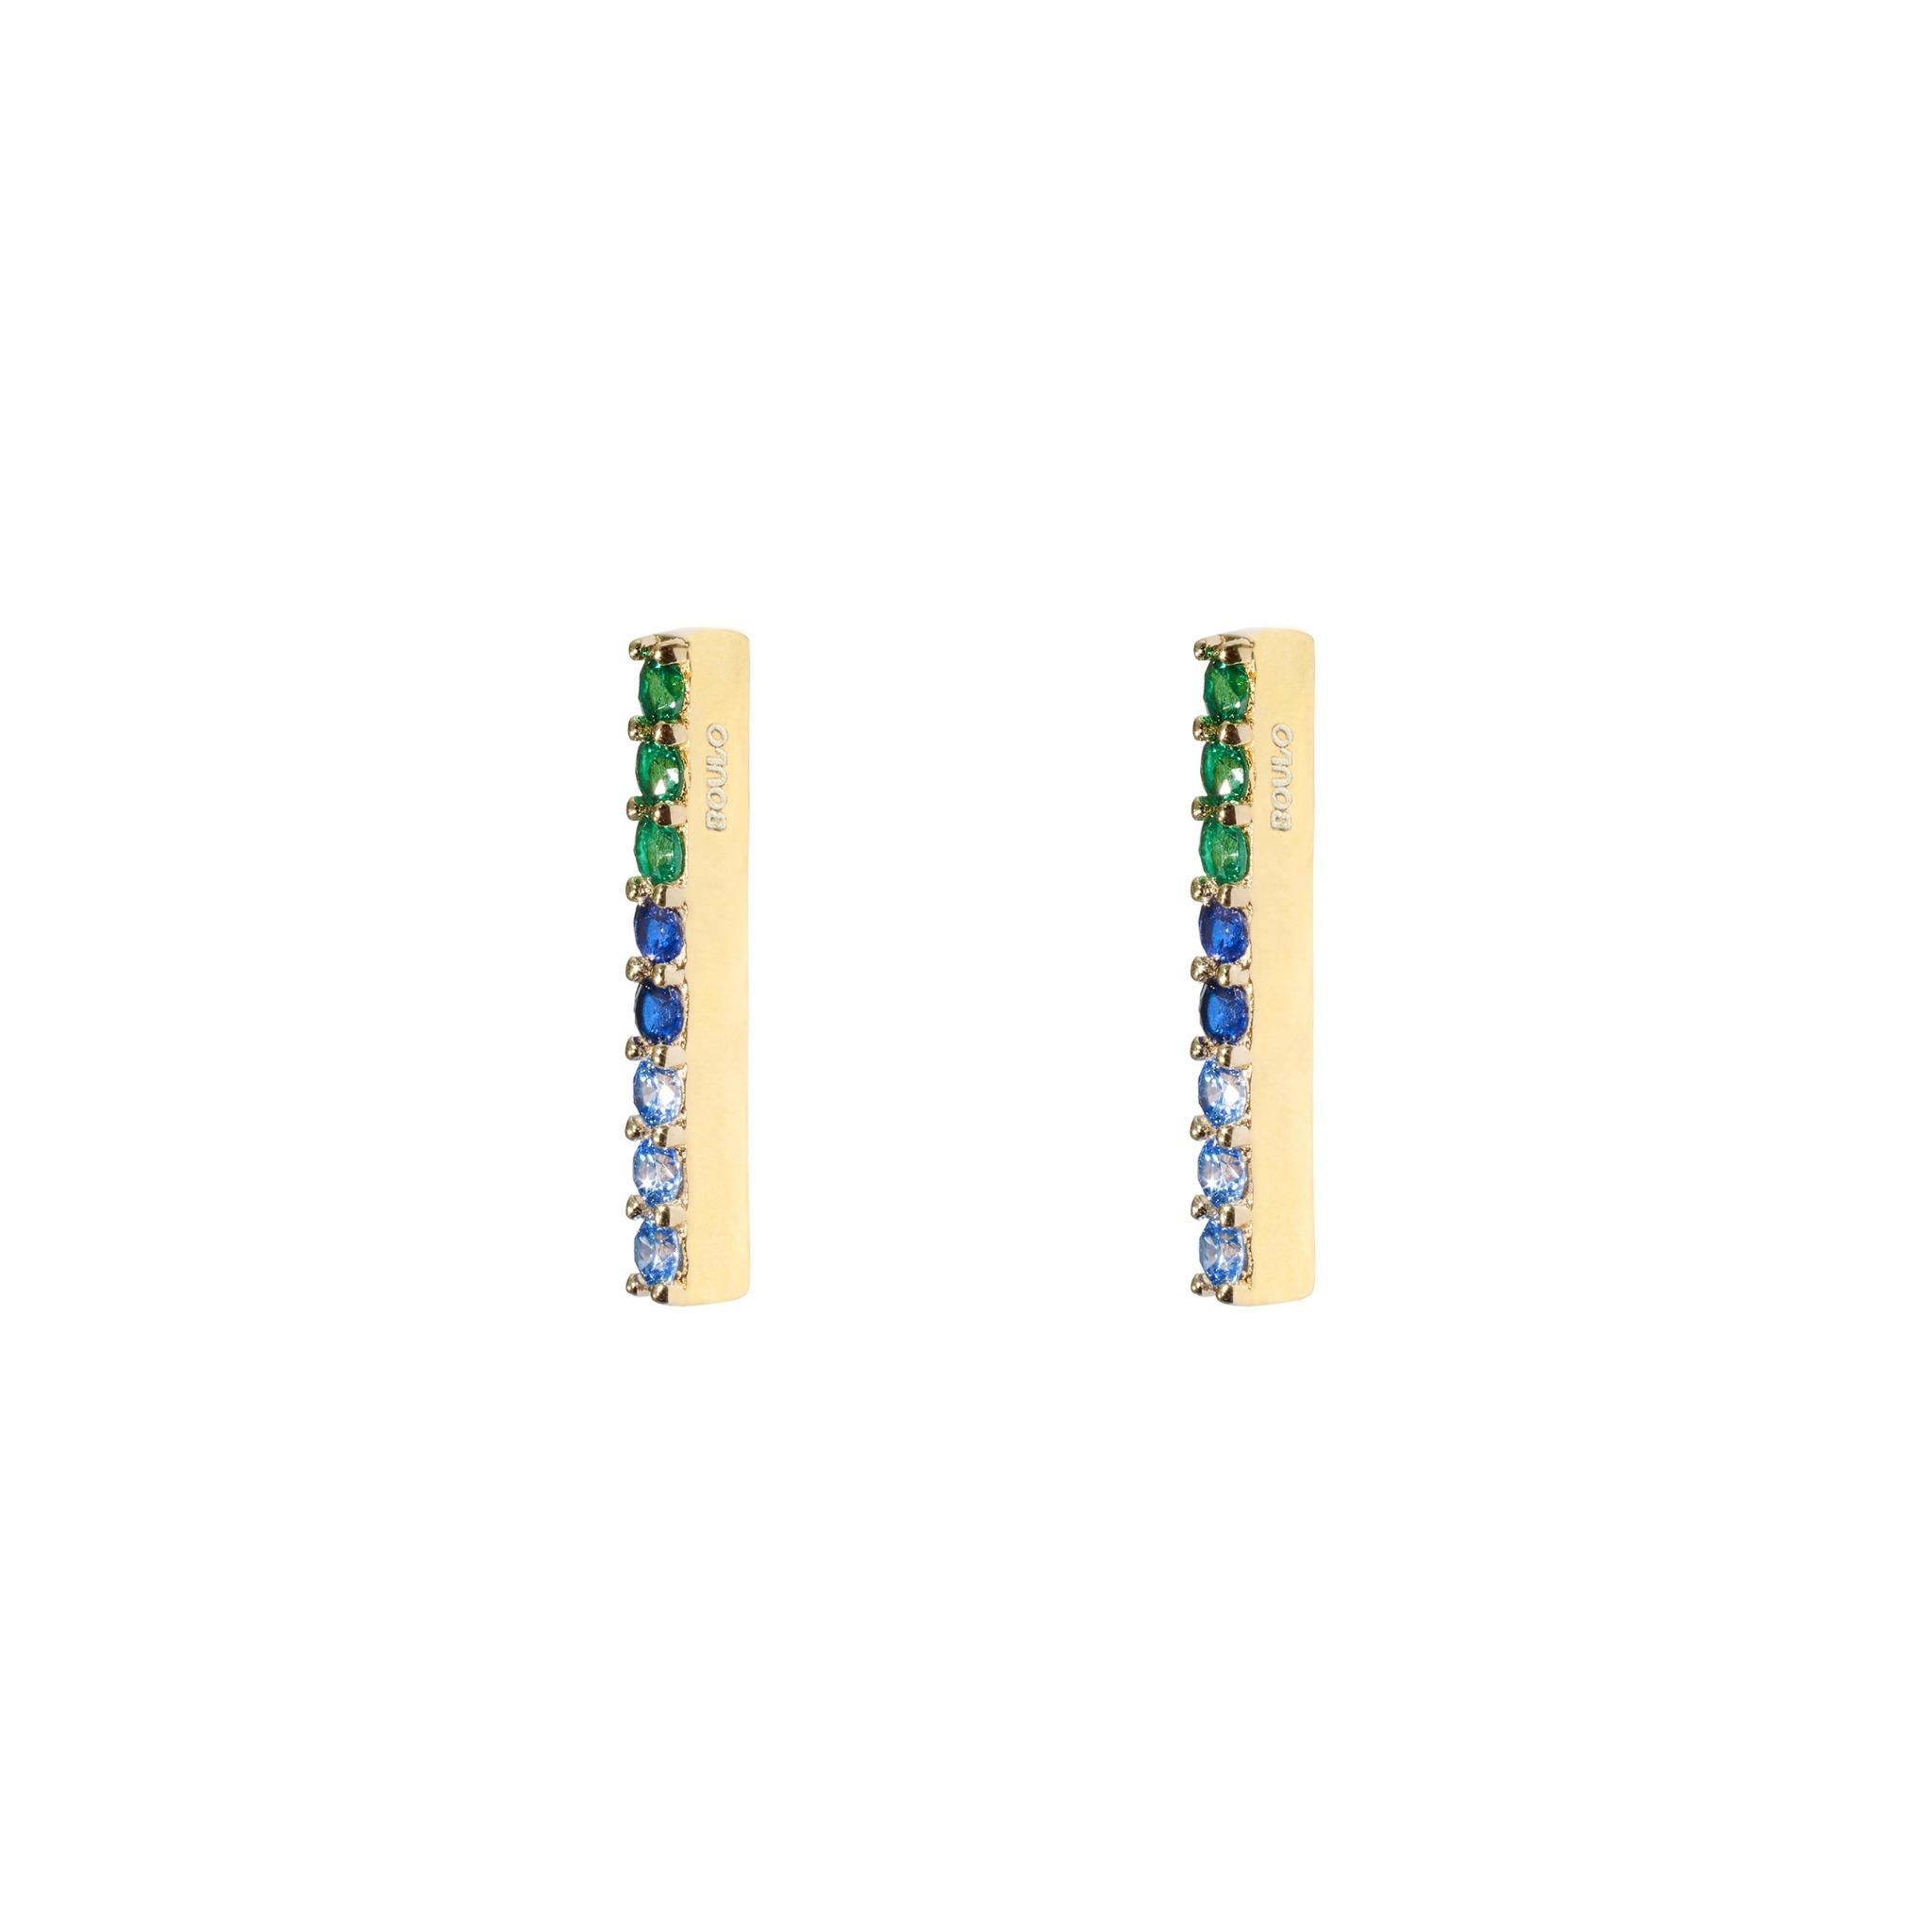 Inspired by the colours of the Aegean Sea and sun, carry this light breeze throughout the day. This short earring is perfect to wear every day. A simple and elegant way to elevate your casual outfits, the short story earring is embellished with